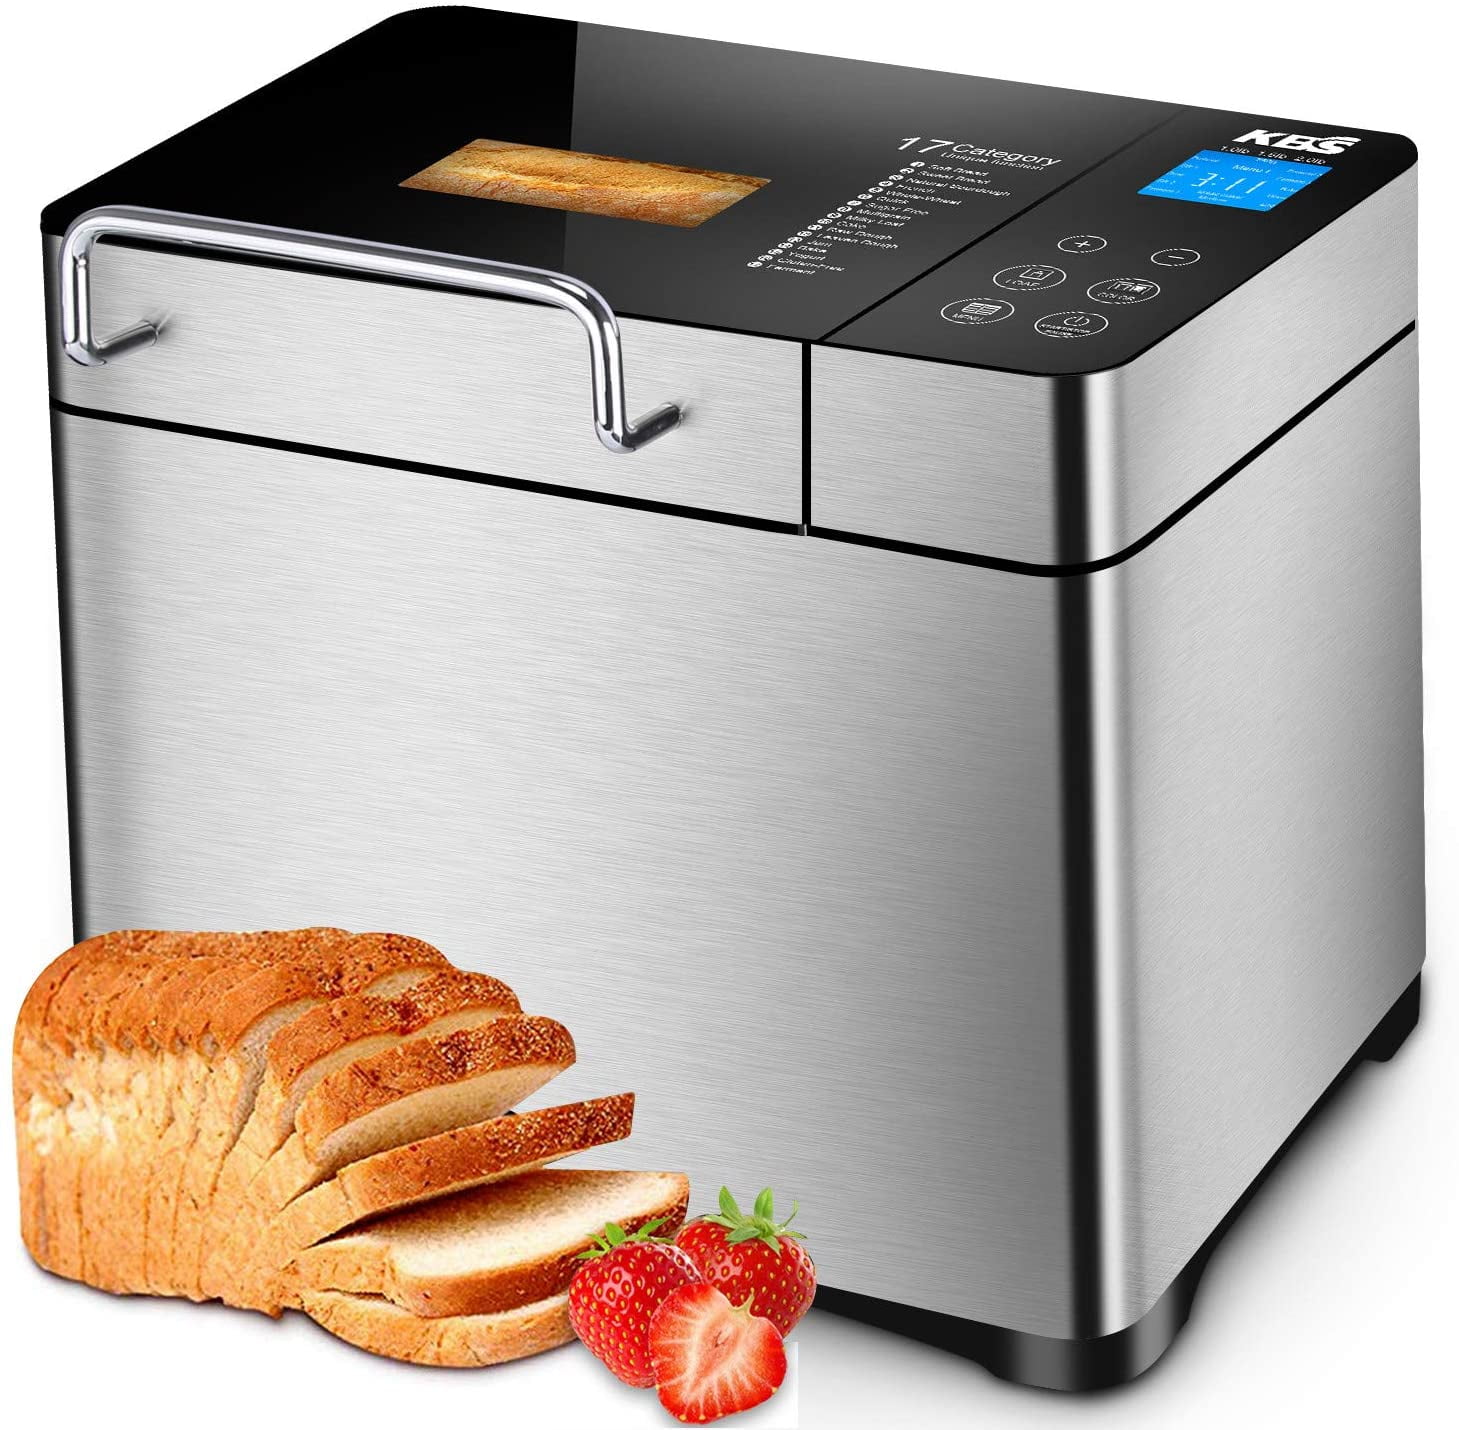 2LB 17-in-1 Programmable XL Bread Maker with Fruit Nut Dispenser Pro Stainless Steel Bread Machine Nonstick Ceramic Pan& Digital Touch Panel